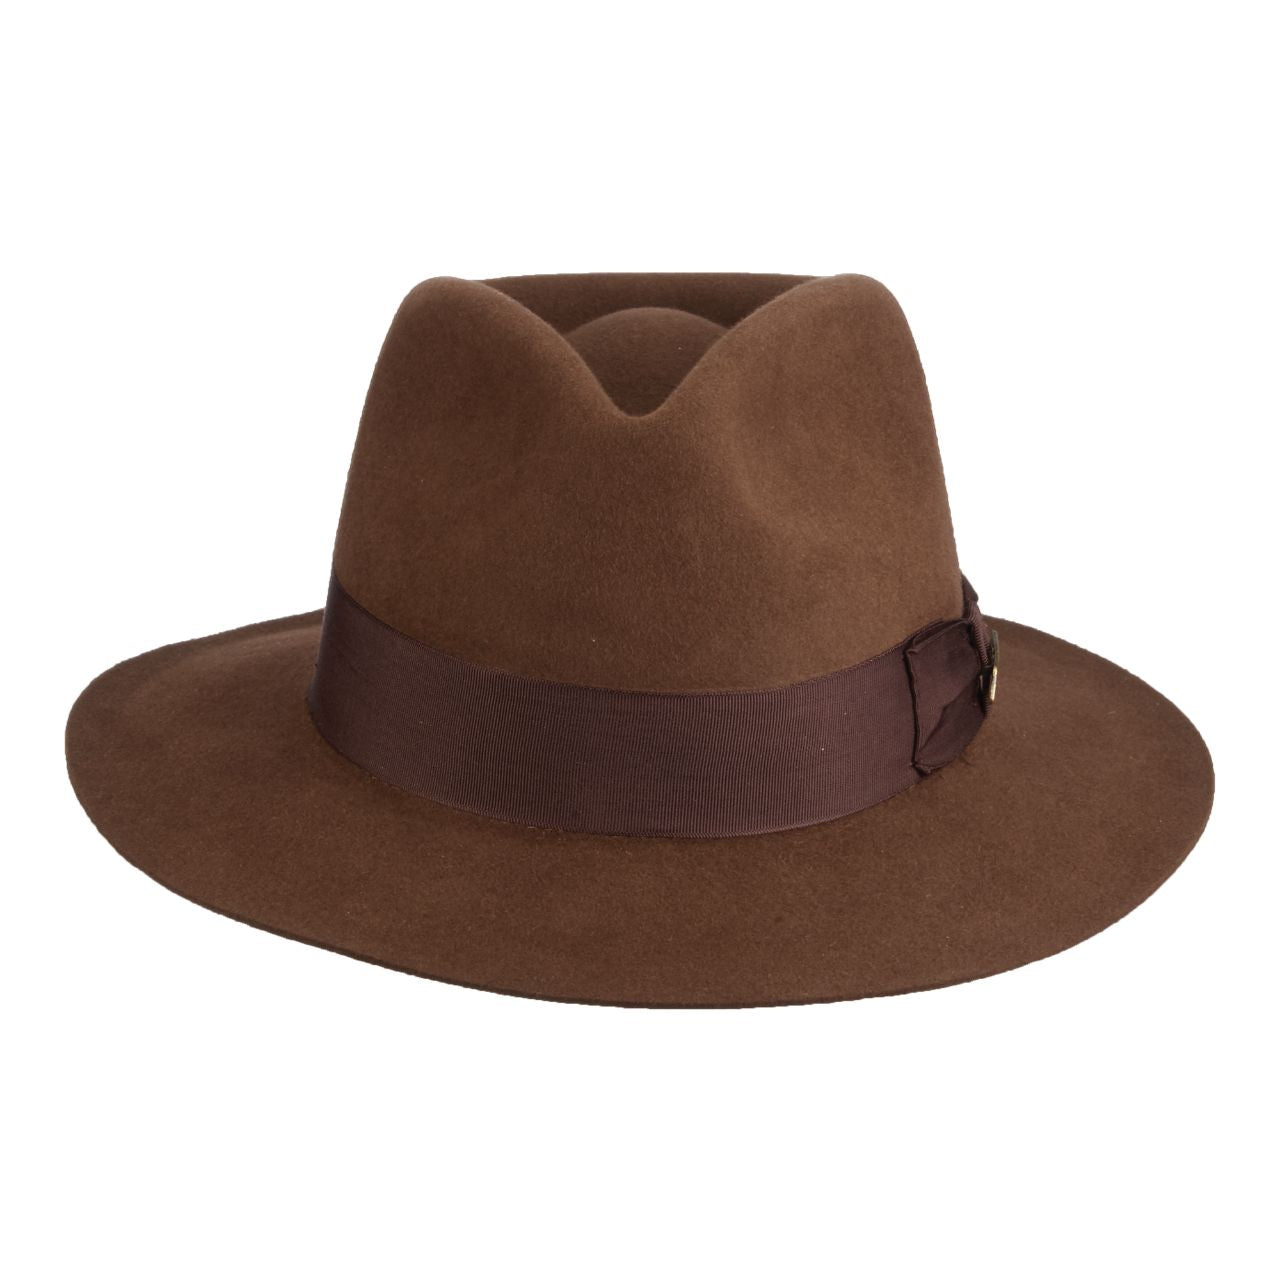 Hat Indiana Jones Photos and Images